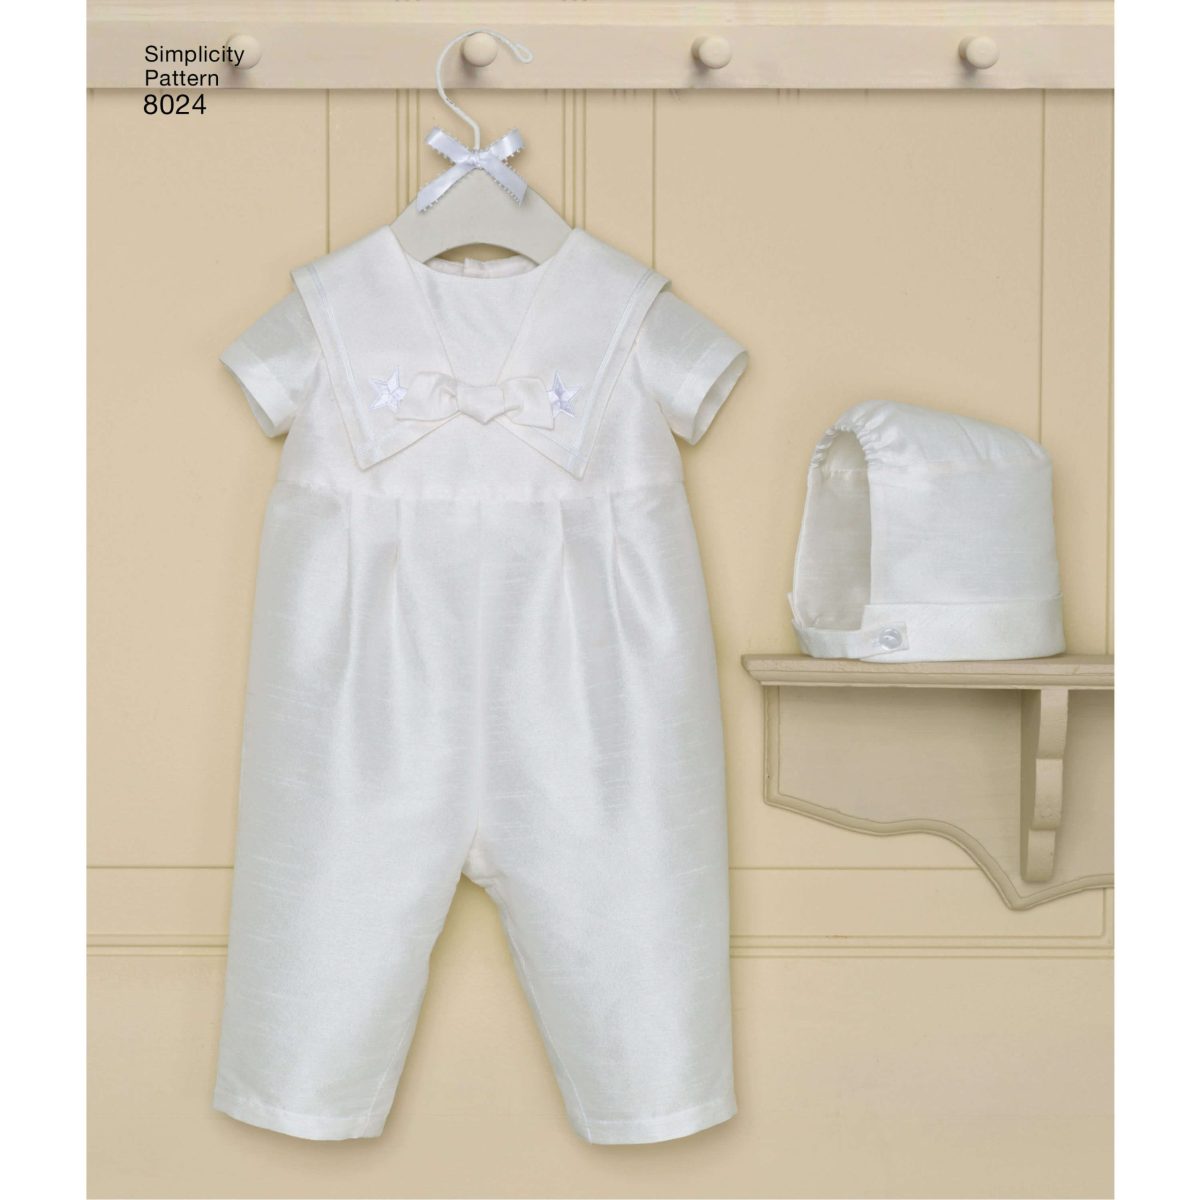 Simplicity Sewing Pattern 8024 Babies' Christening Sets with Bonnets